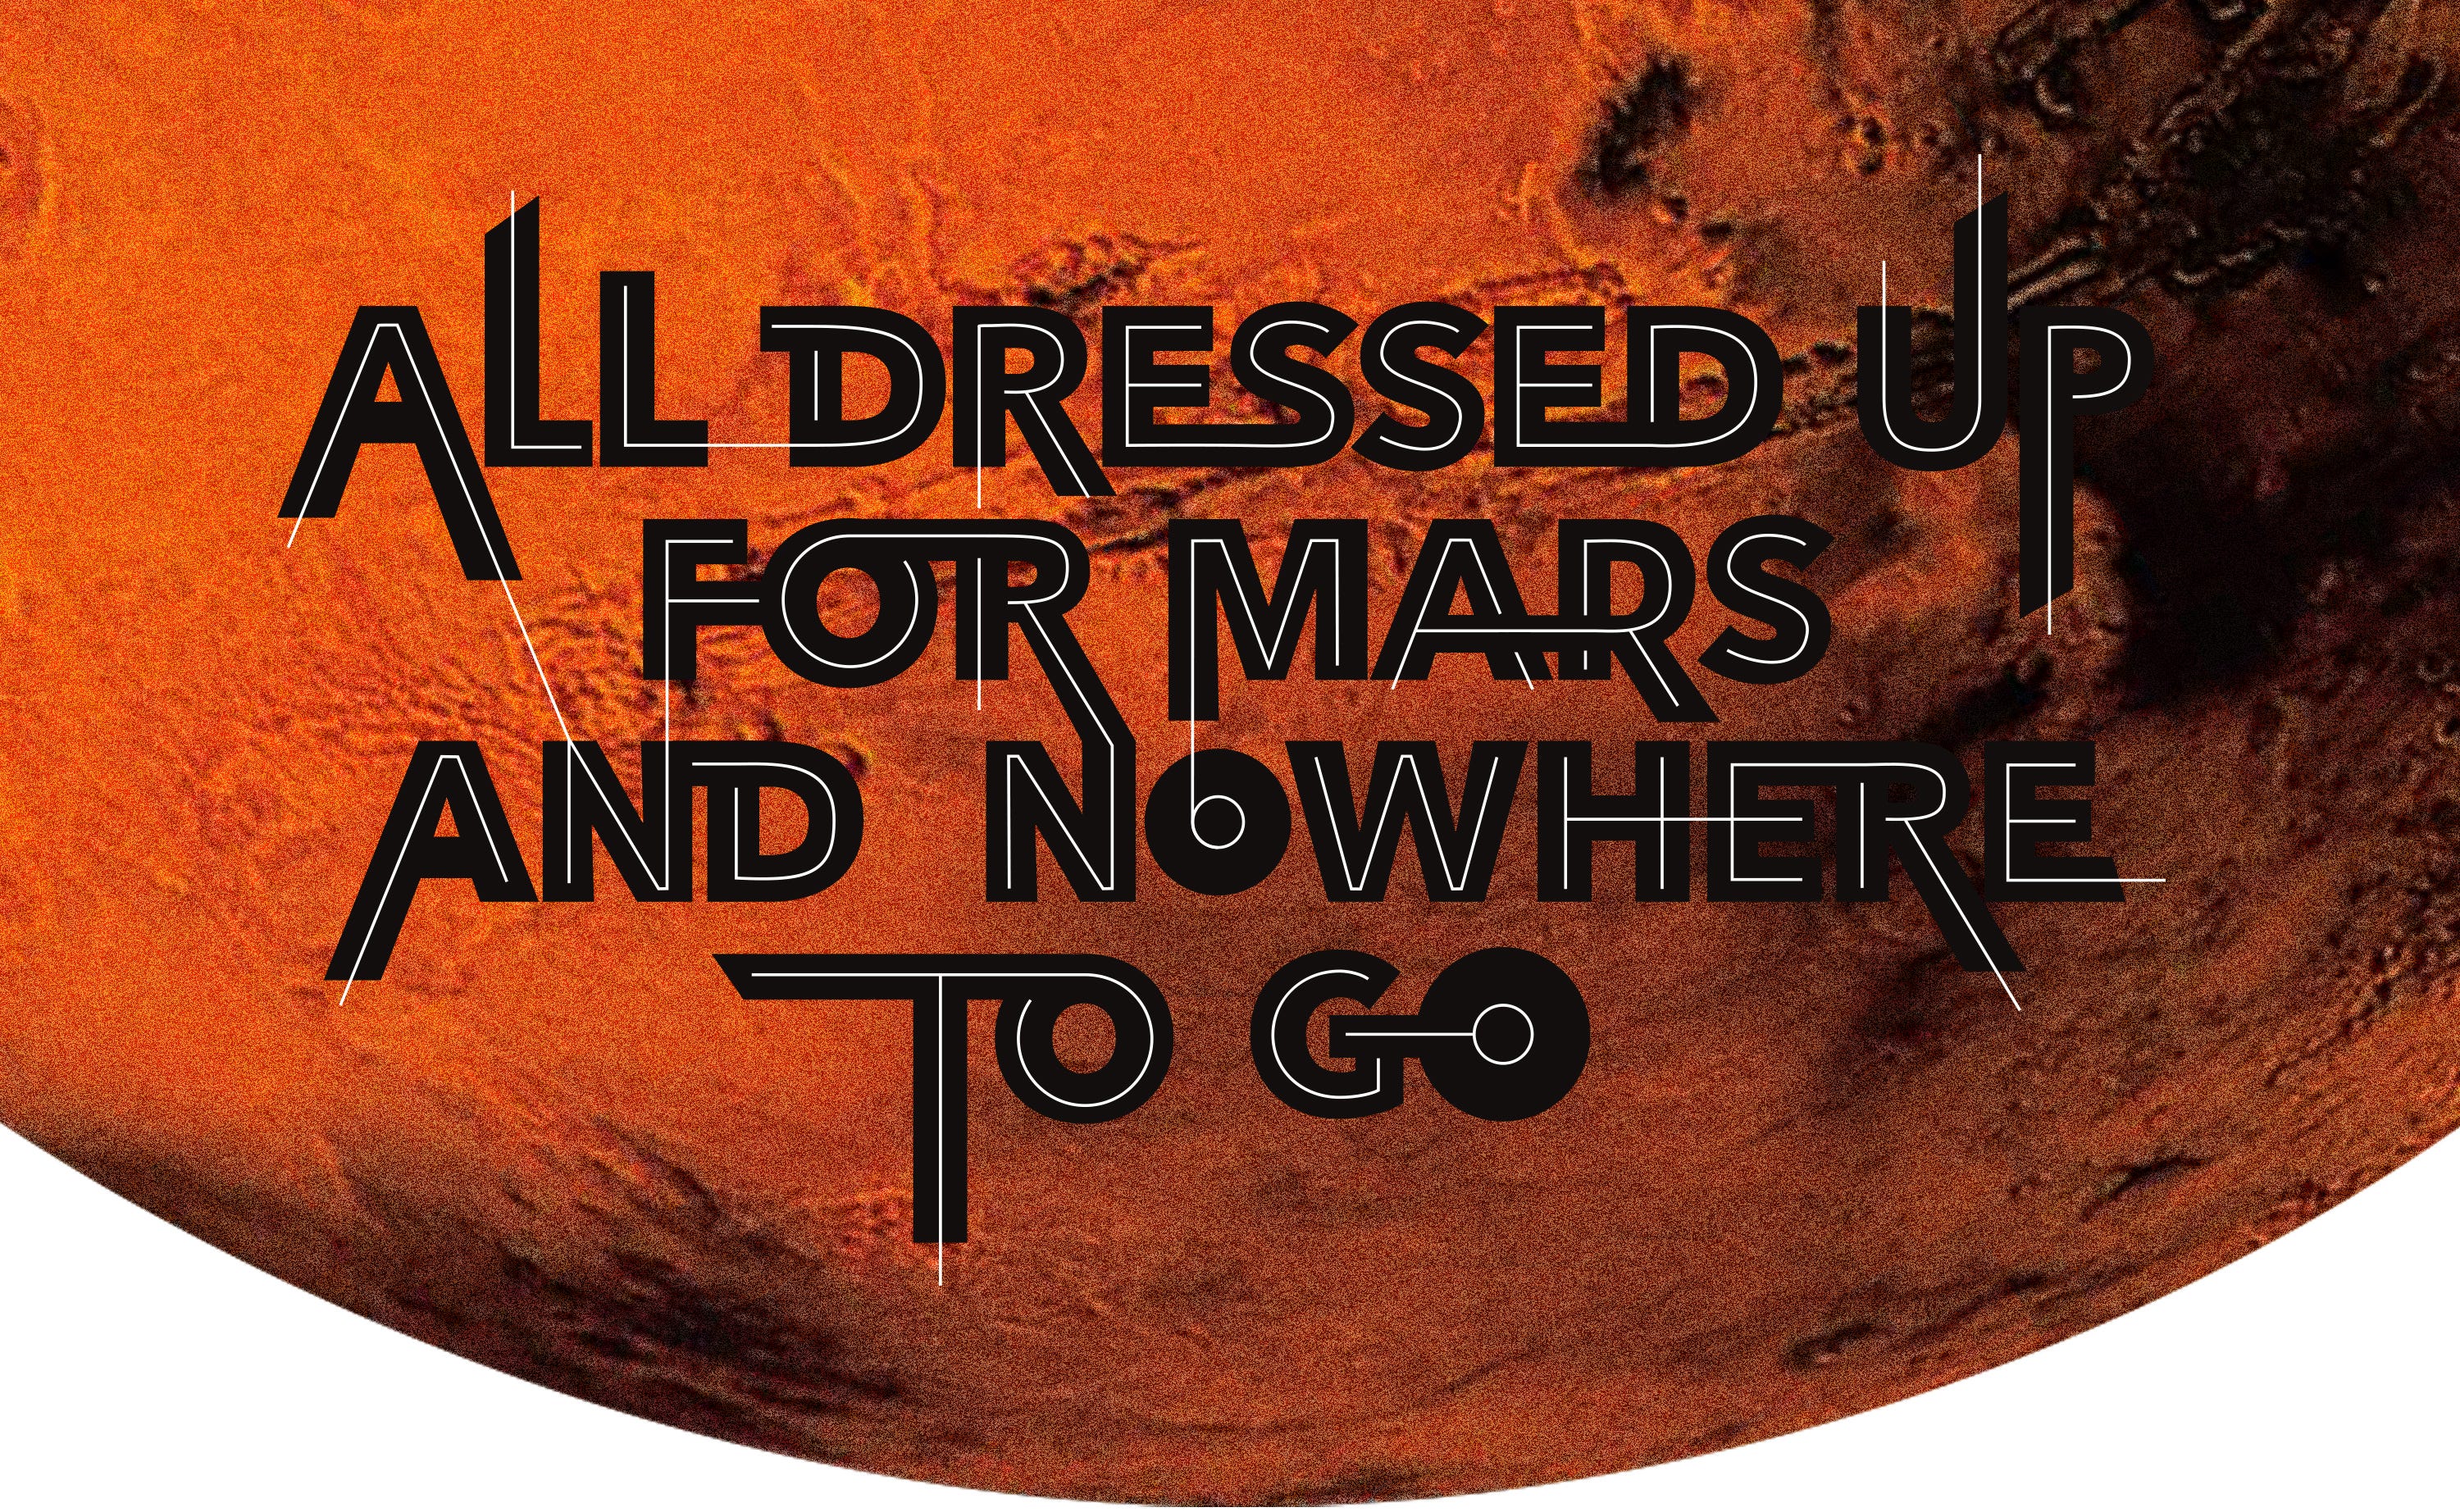 All Dressed Up For Mars and Nowhere to Go, by Elmo Keep